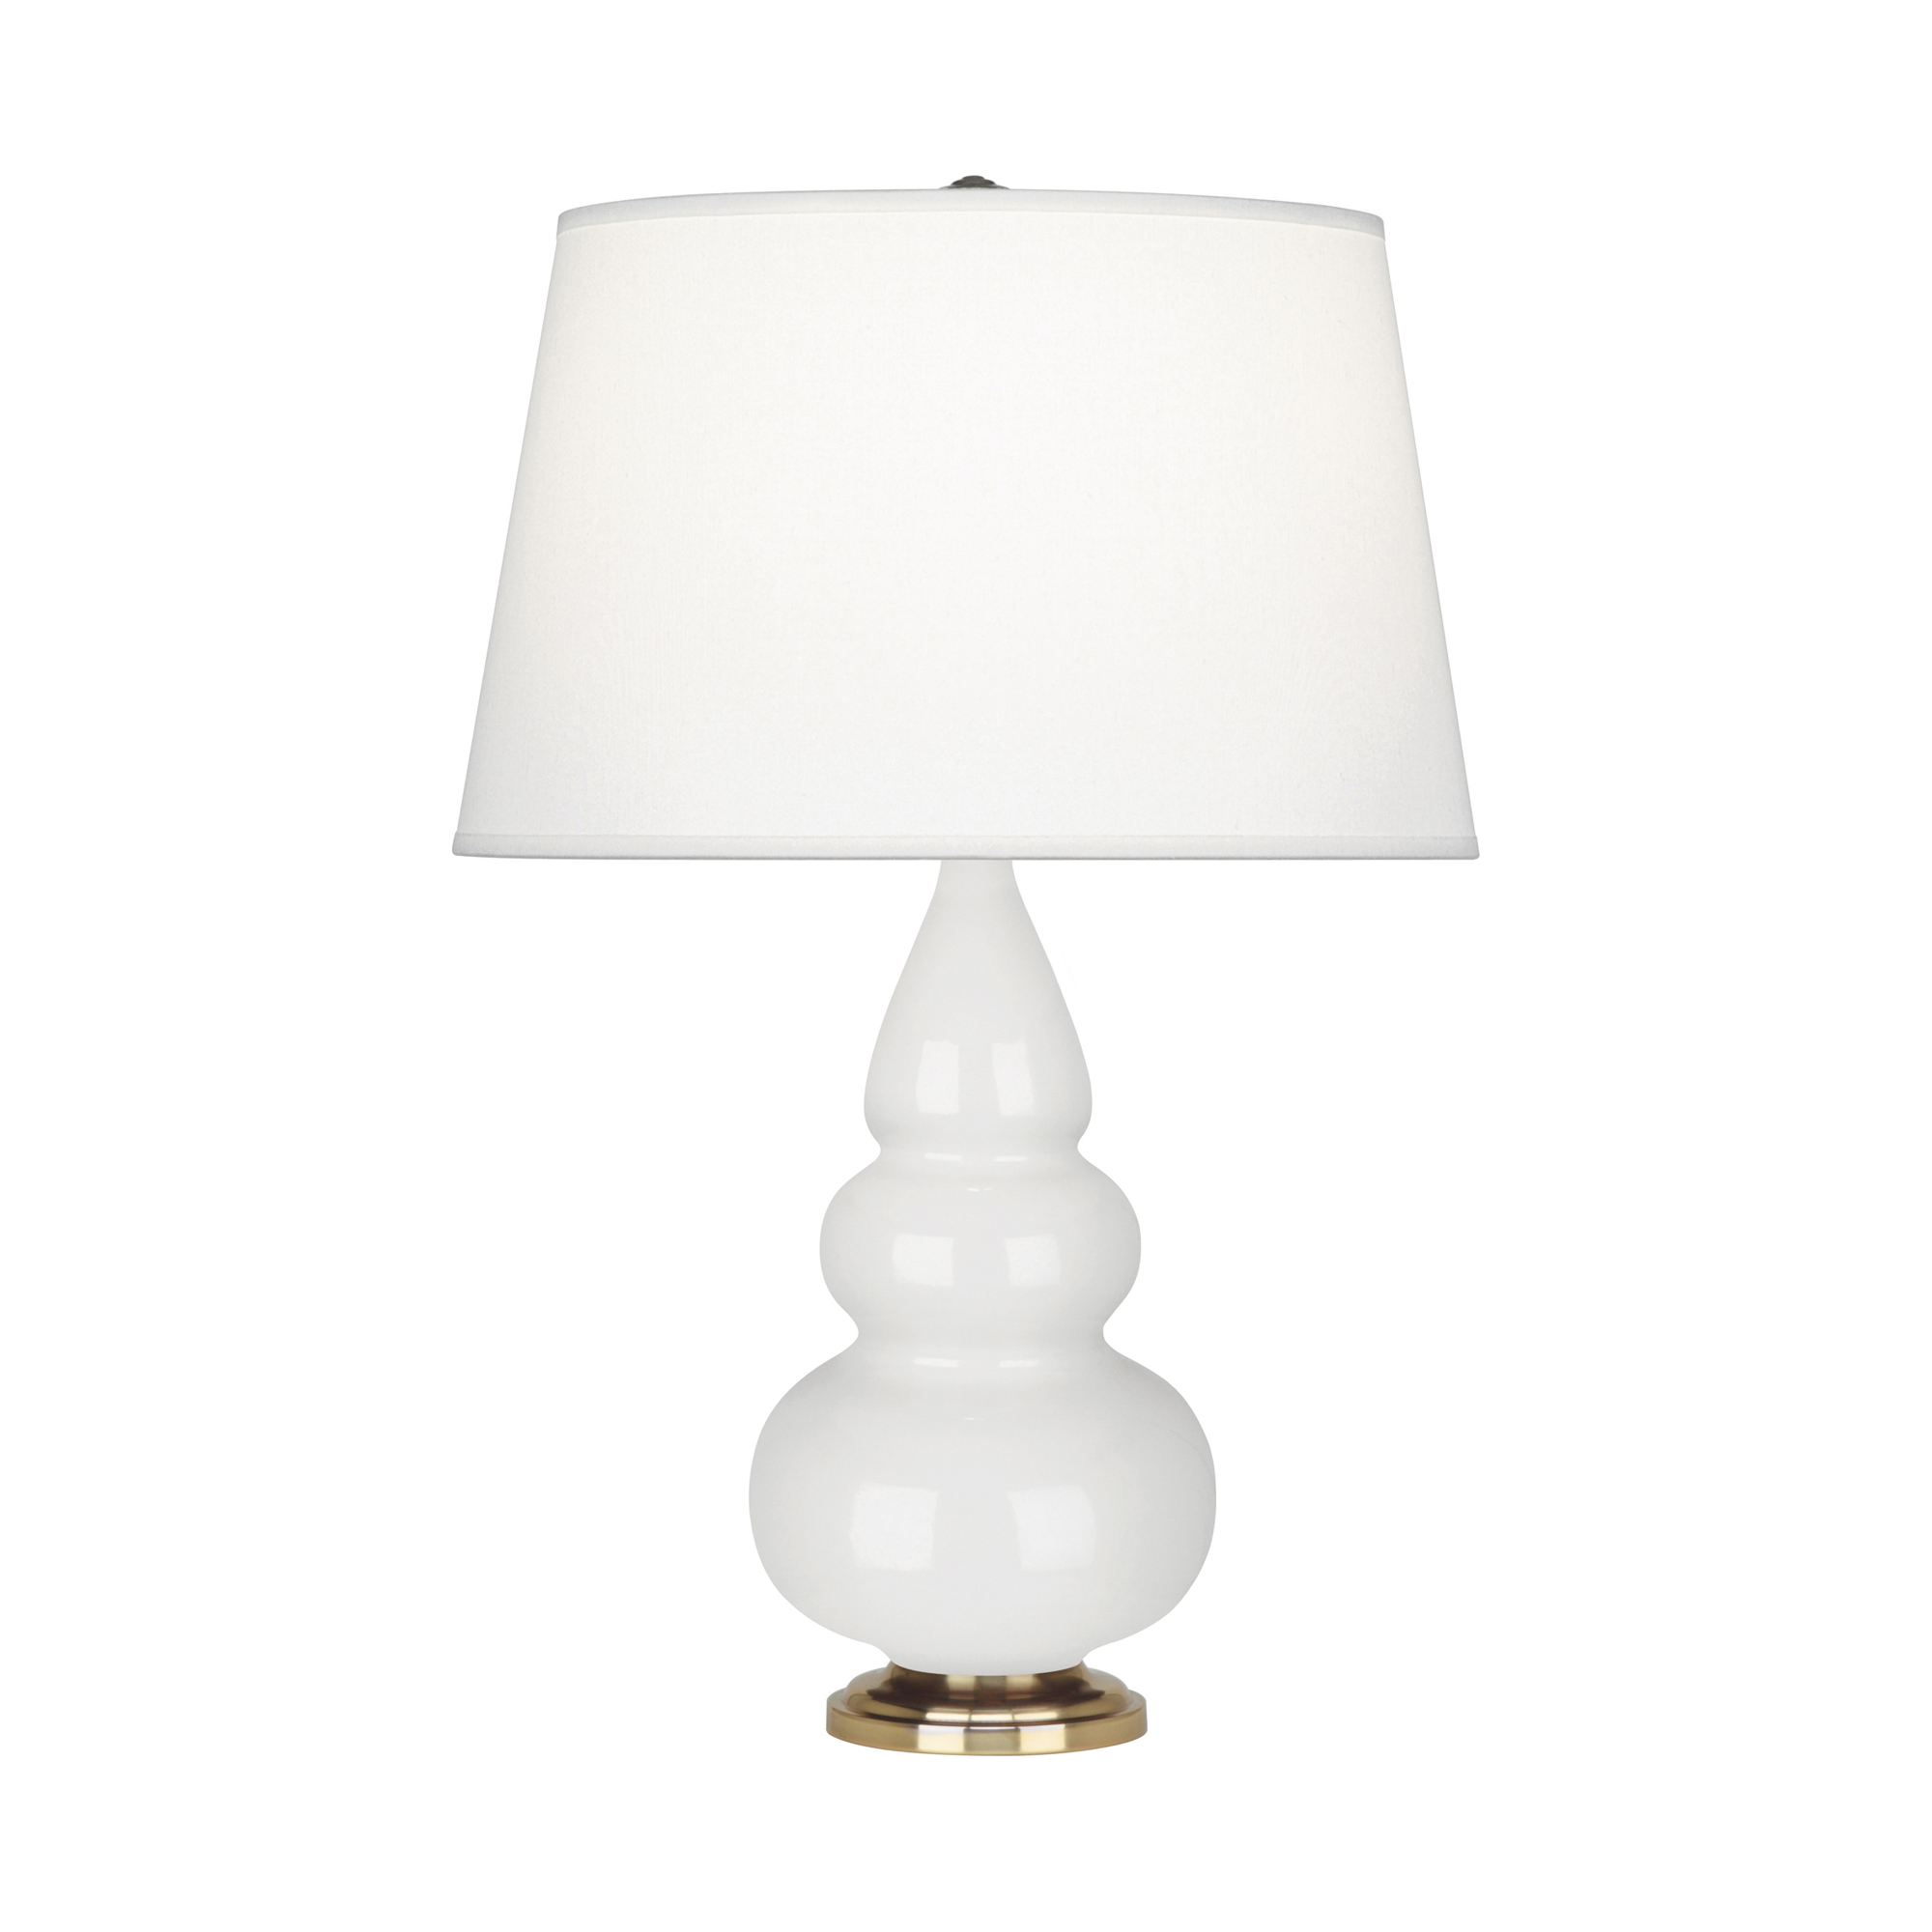 Small Triple Gourd Accent Lamp Style #241X